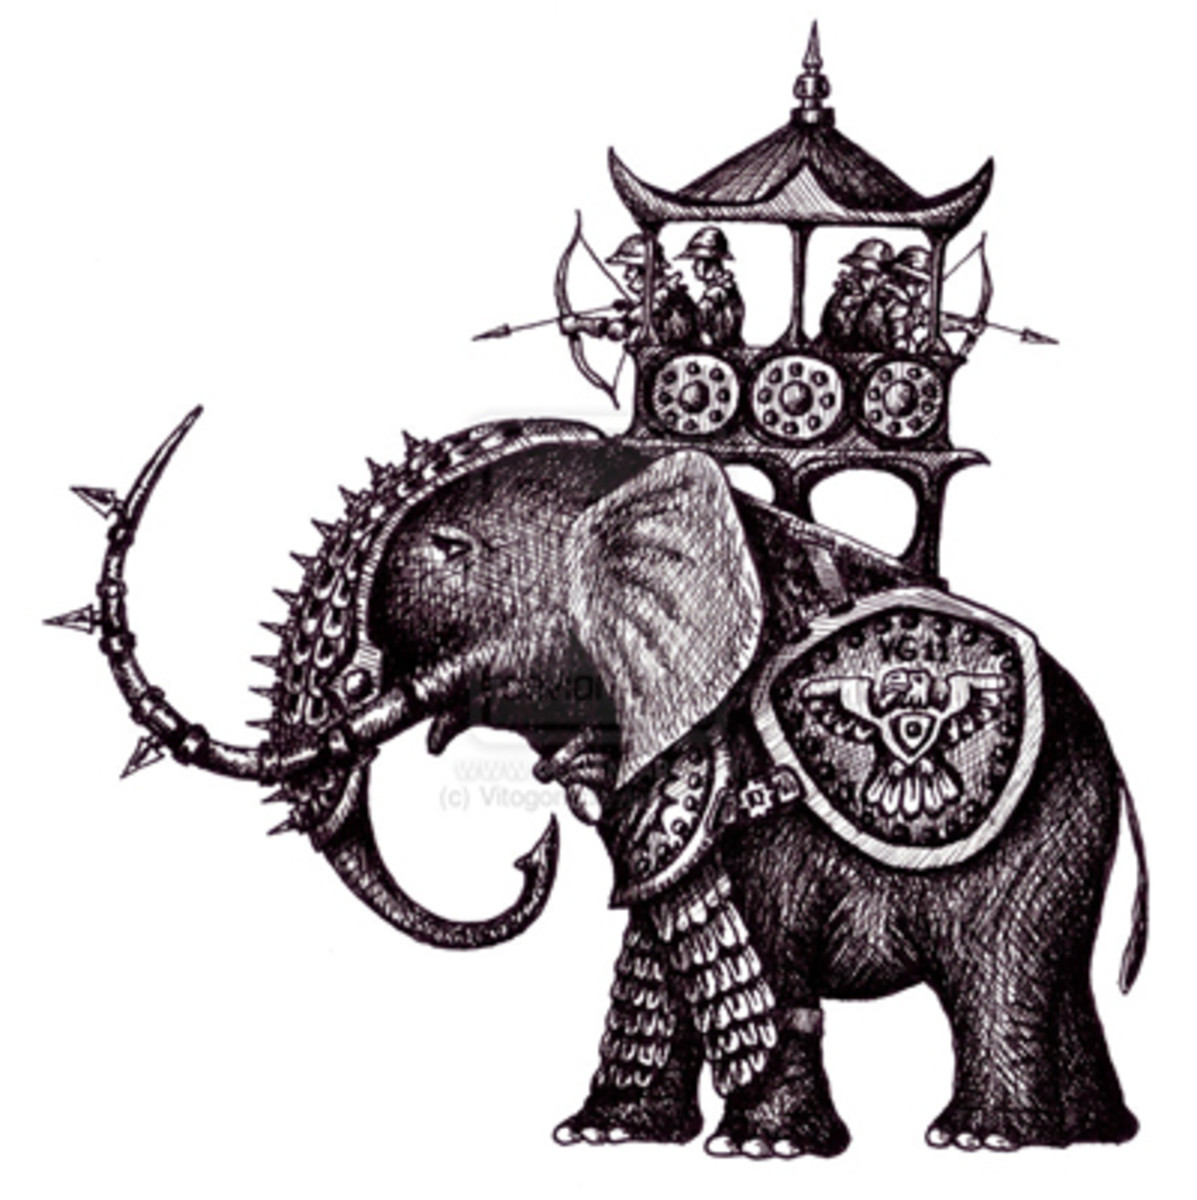 a-brief-history-of-elephants